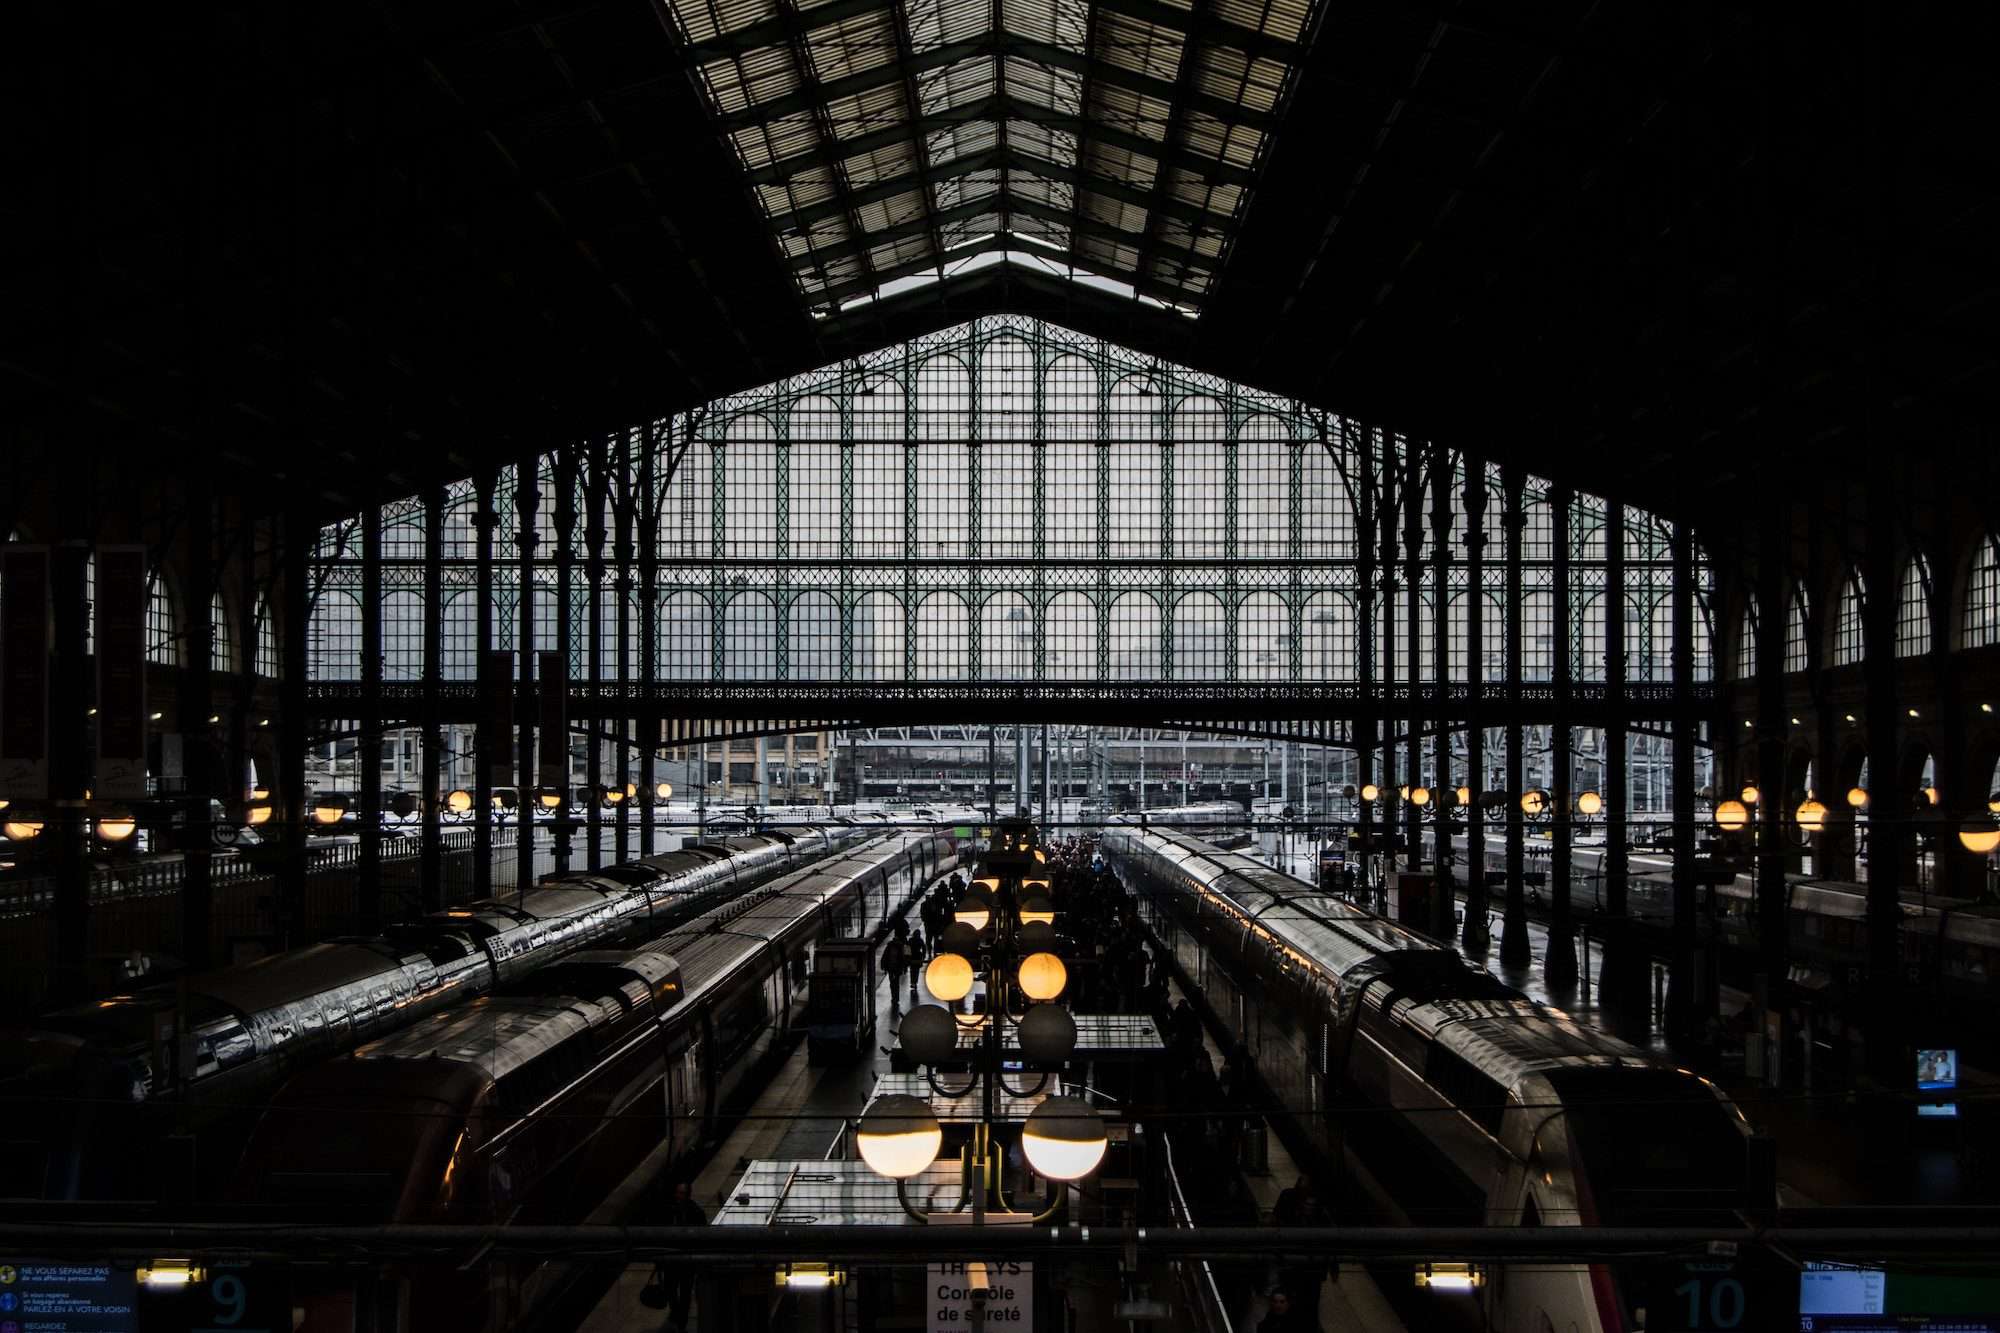 A shadowed view of trains waiting at the platforms of the Gare du station with its Art nouveau glass and iron structure.